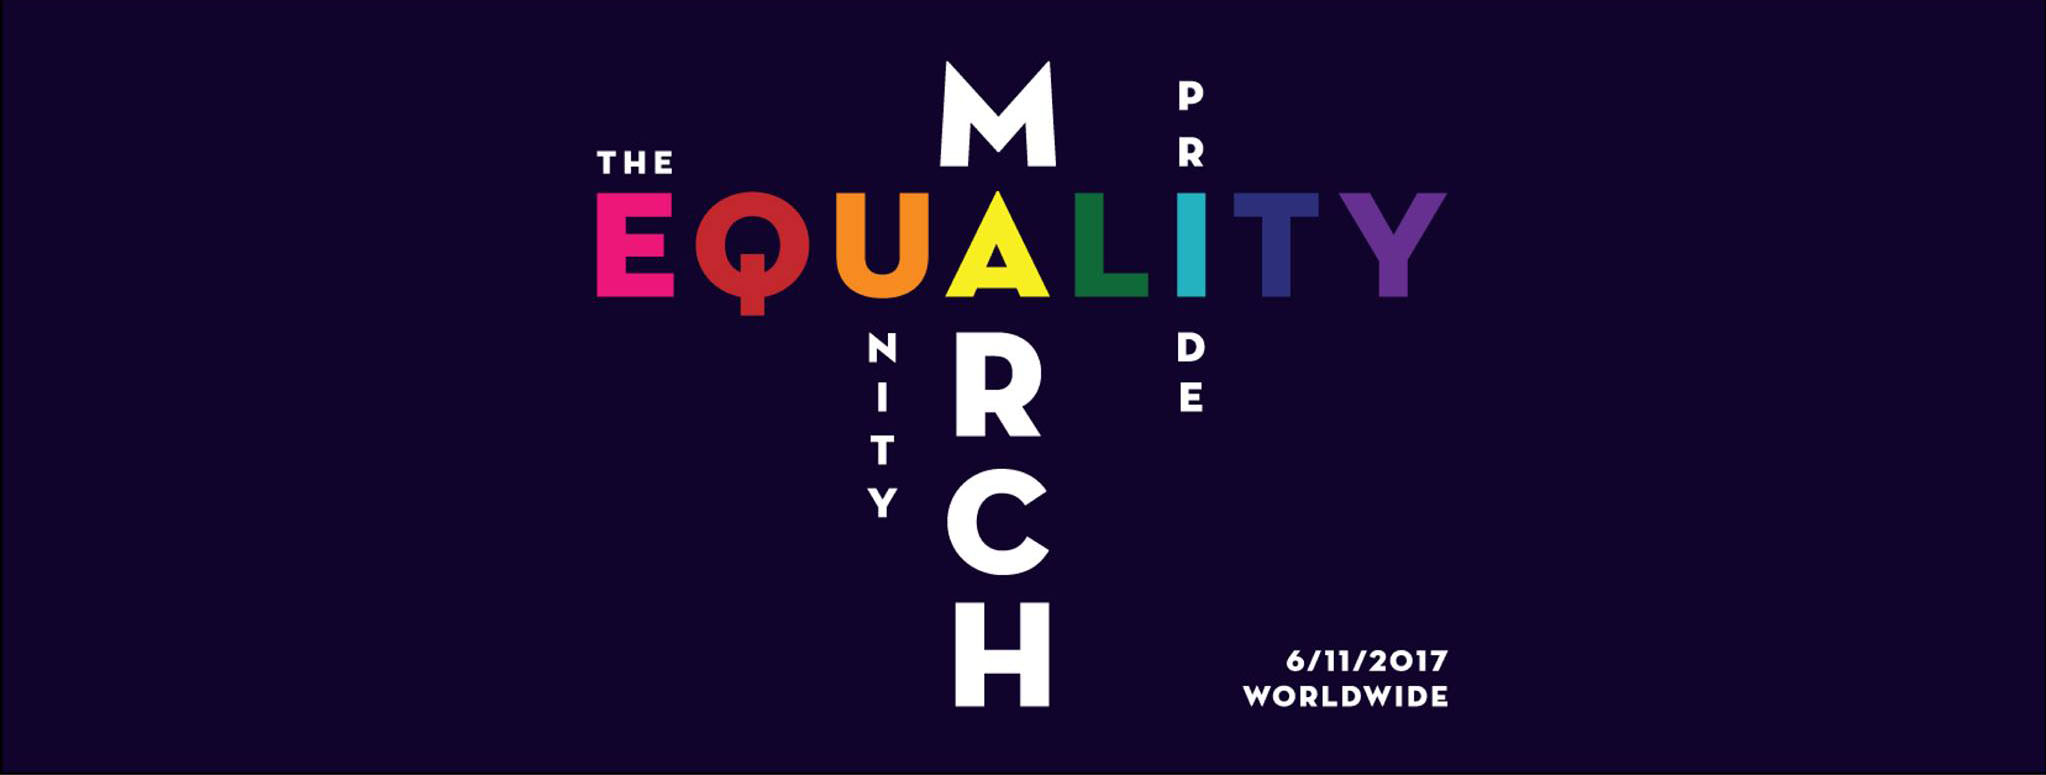 equality march header